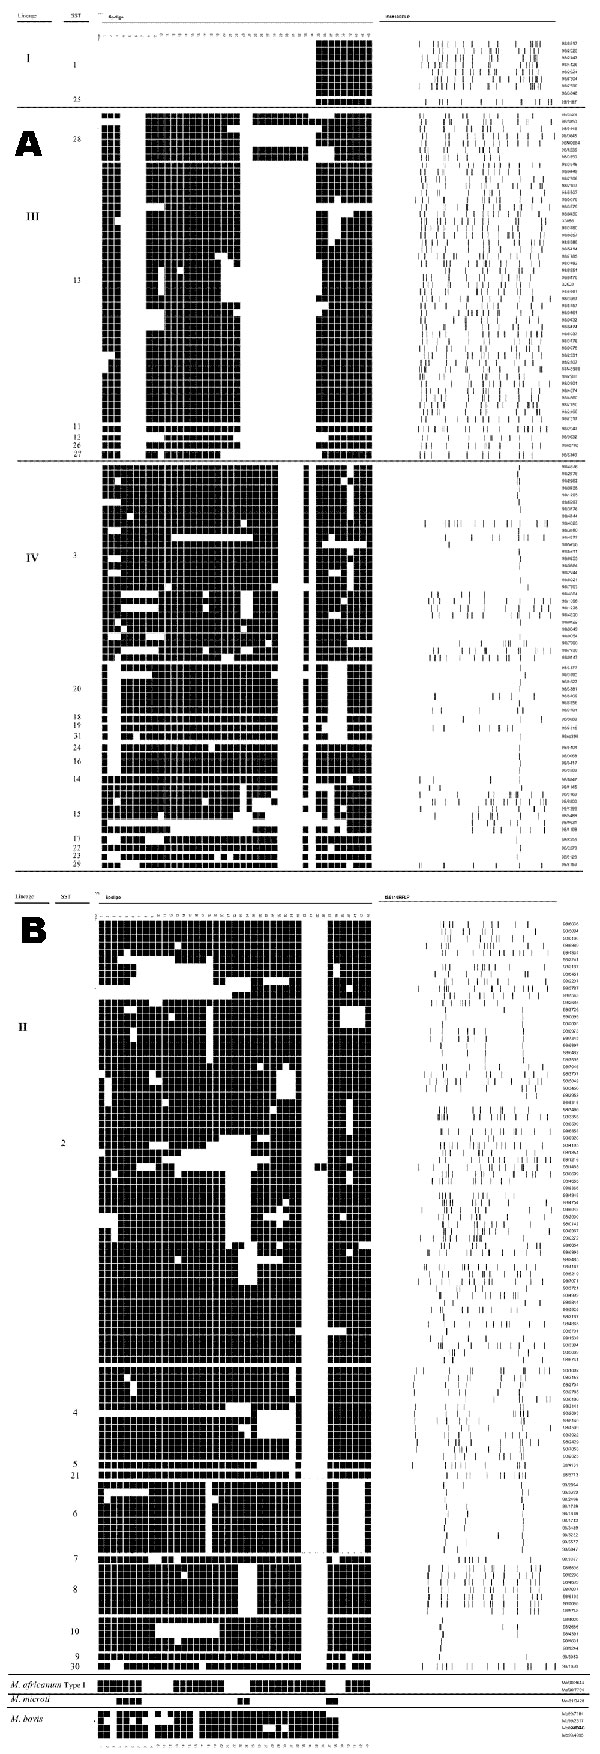 Relationship between Mycobacterium tuberculosis synonymous sequence type (SST), and lineage (left hand column), spoligotype pattern (middle column), and IS6110 restriction fragment length polymorphism.